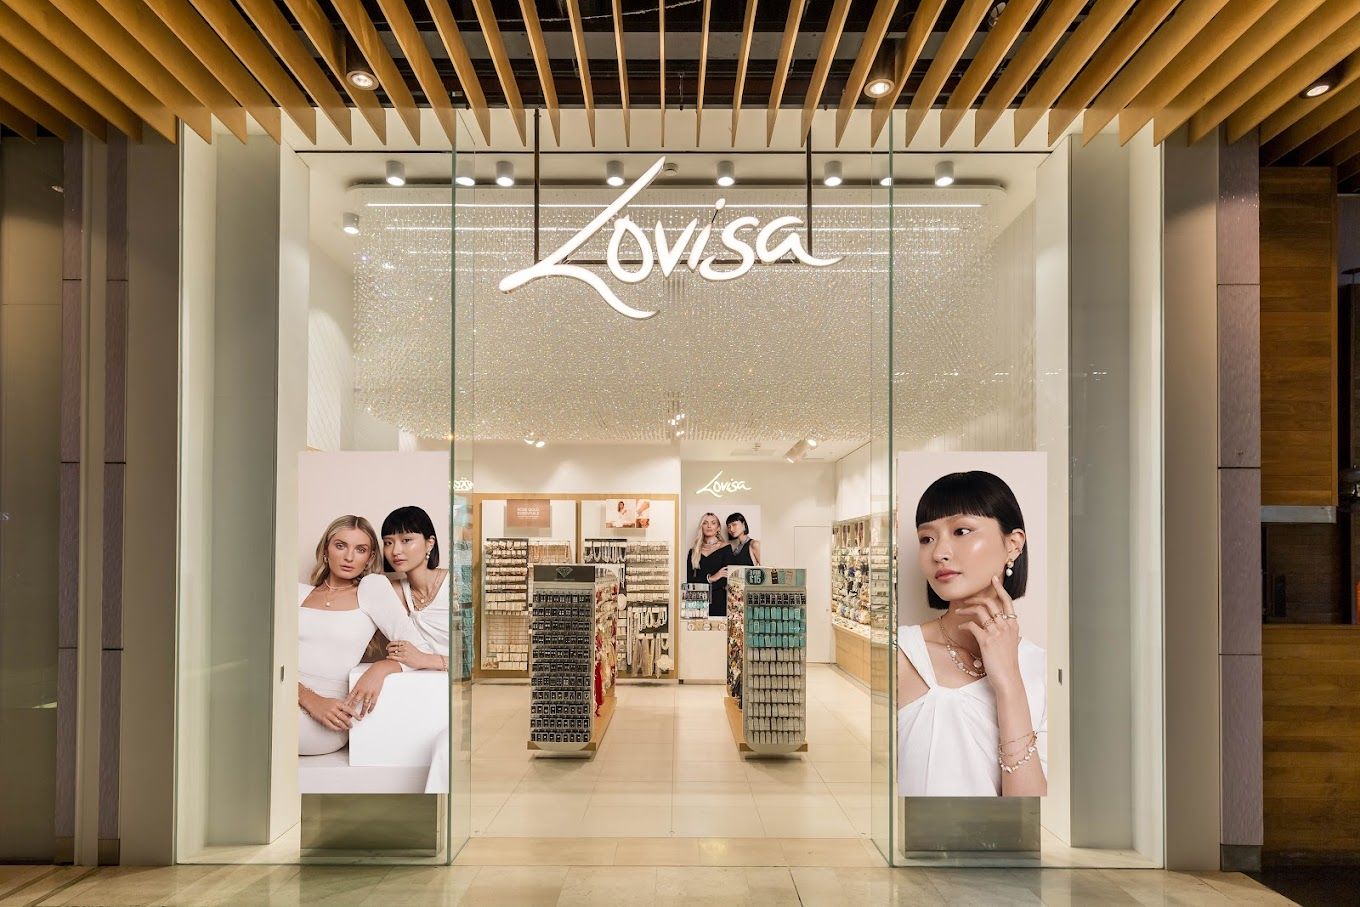 a store called lovisa has a large glass door